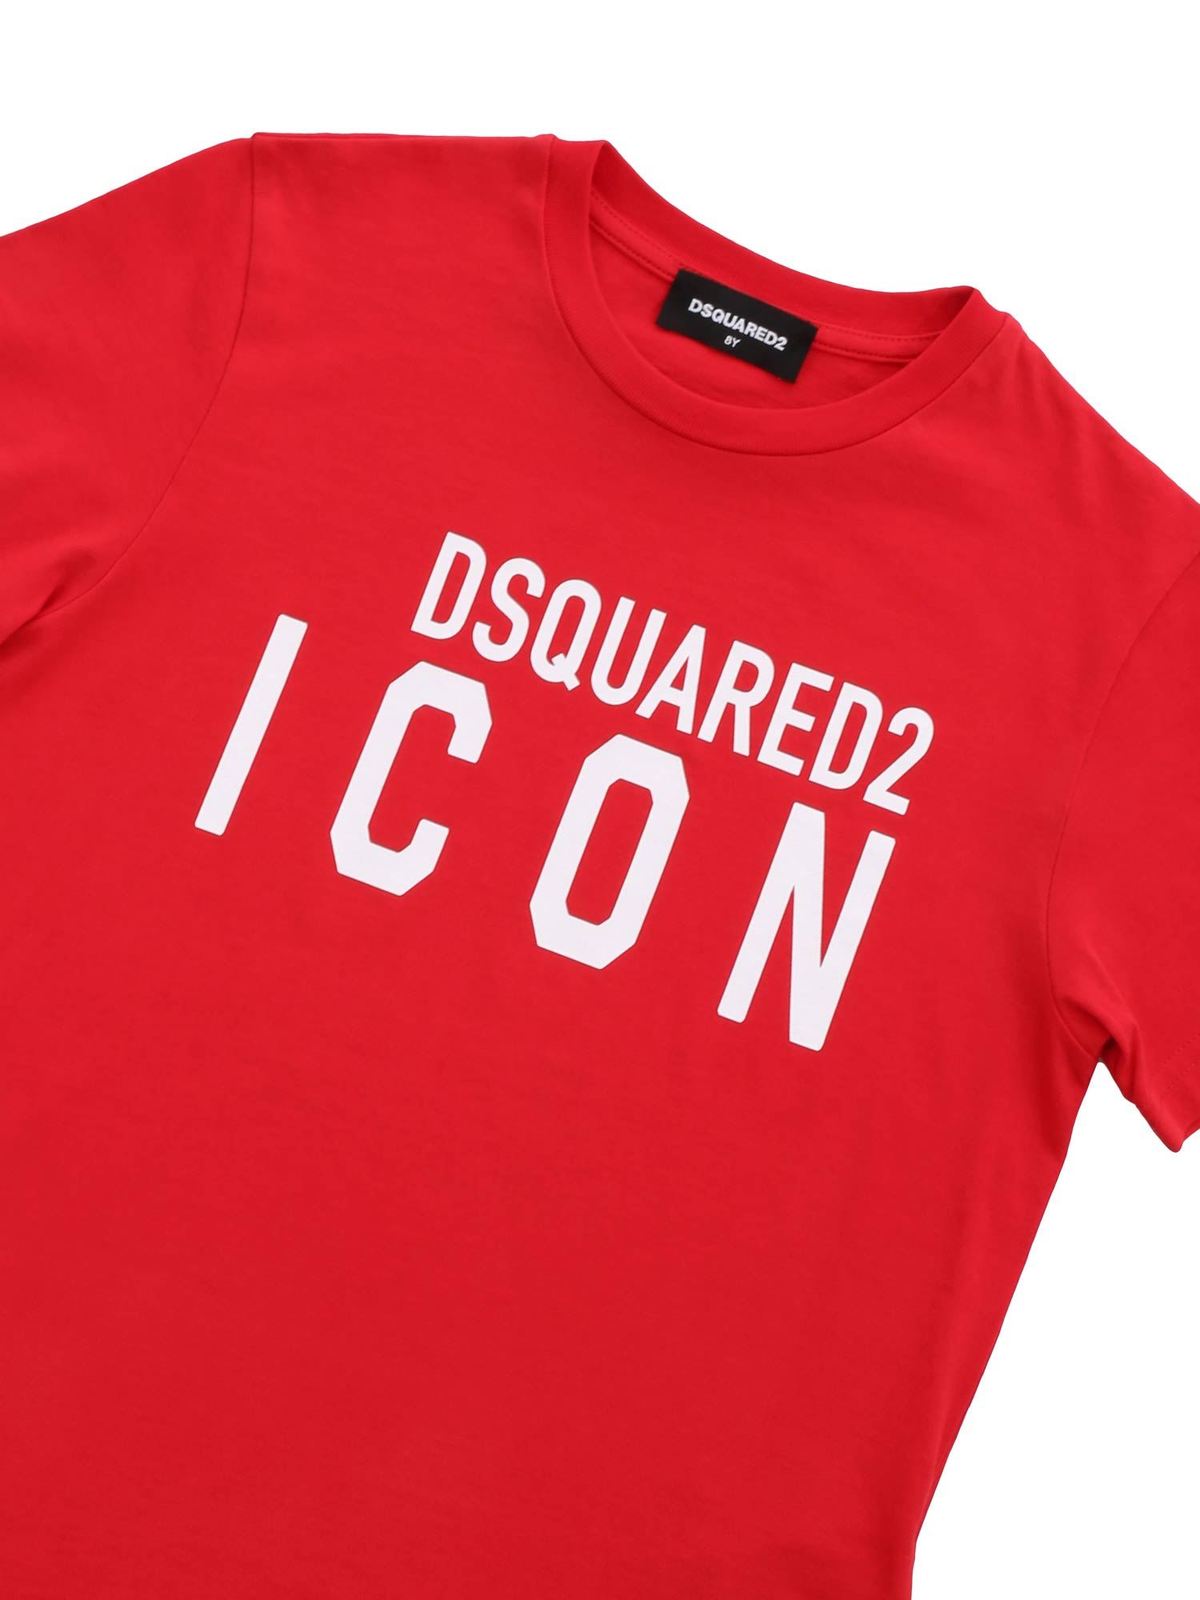 dsquared t shirt red